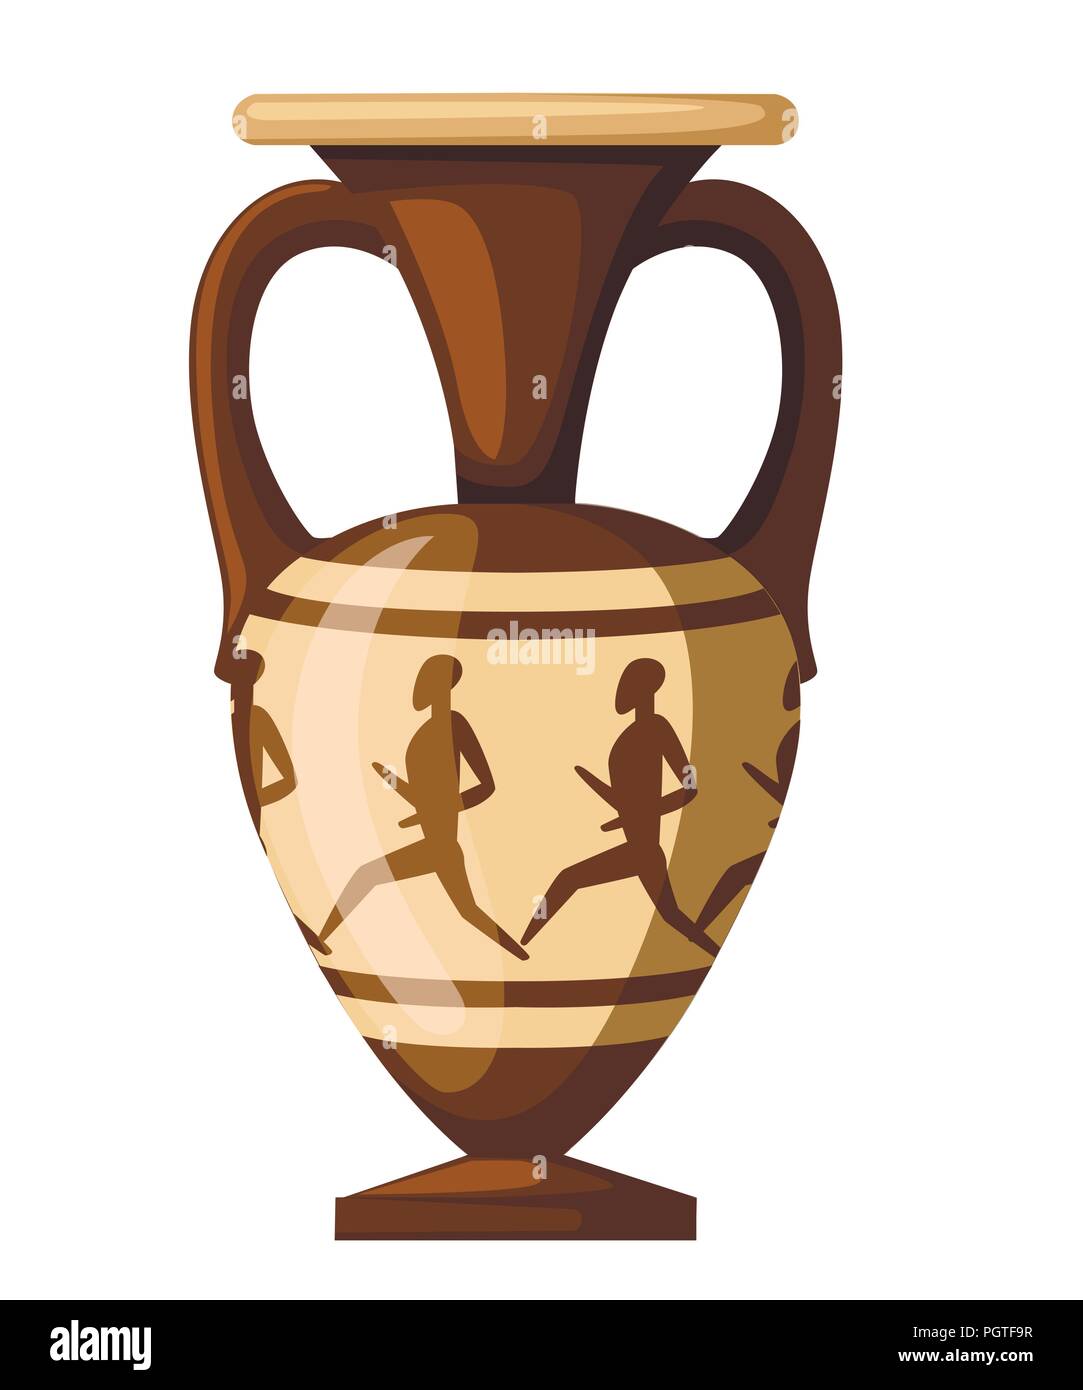 Ancient amphora illustration. Amphora with humans and two handle. Greek or roman culture. Brown color and patterns. Flat vector illustration isolated  Stock Vector